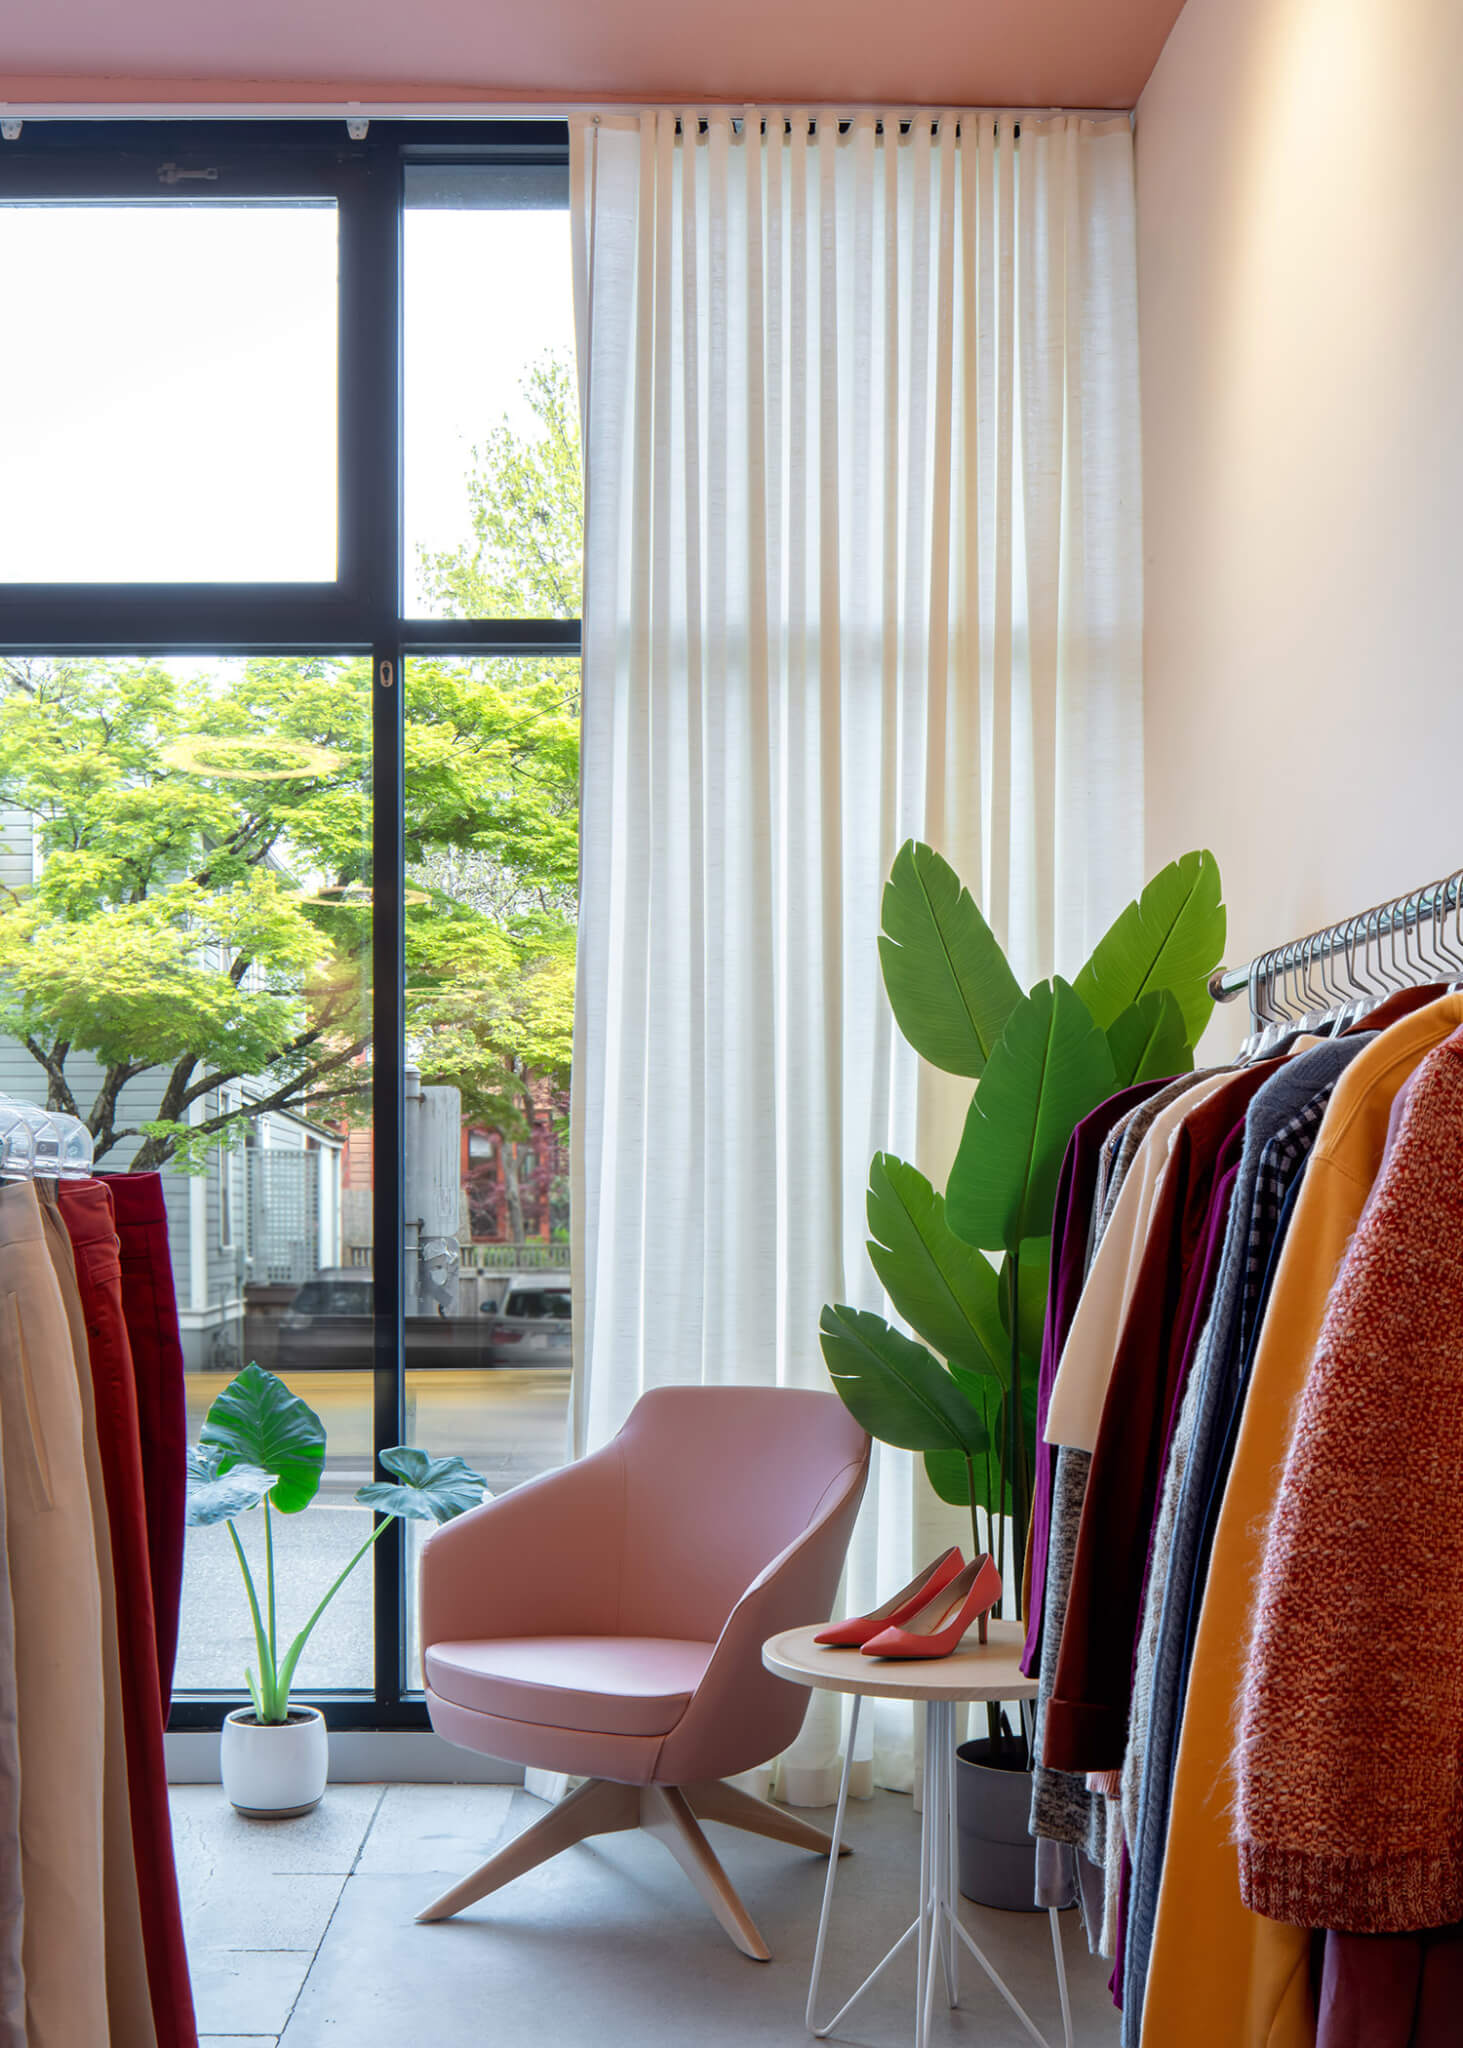 racks of clothing fill a room with a large window and potted plants